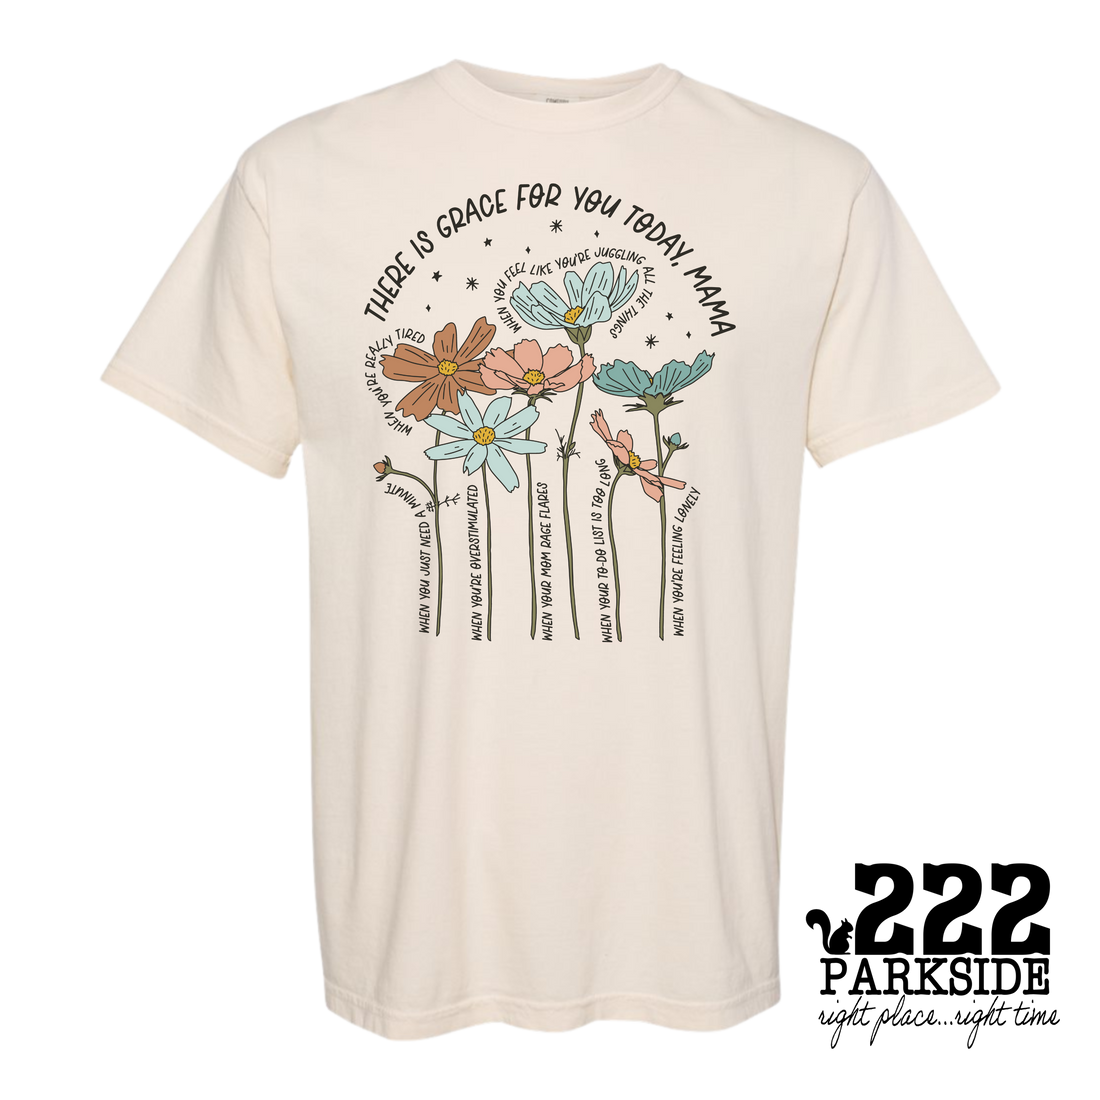 THERE IS GRACE FOR YOU TODAY MAMA GRAPHIC TEE